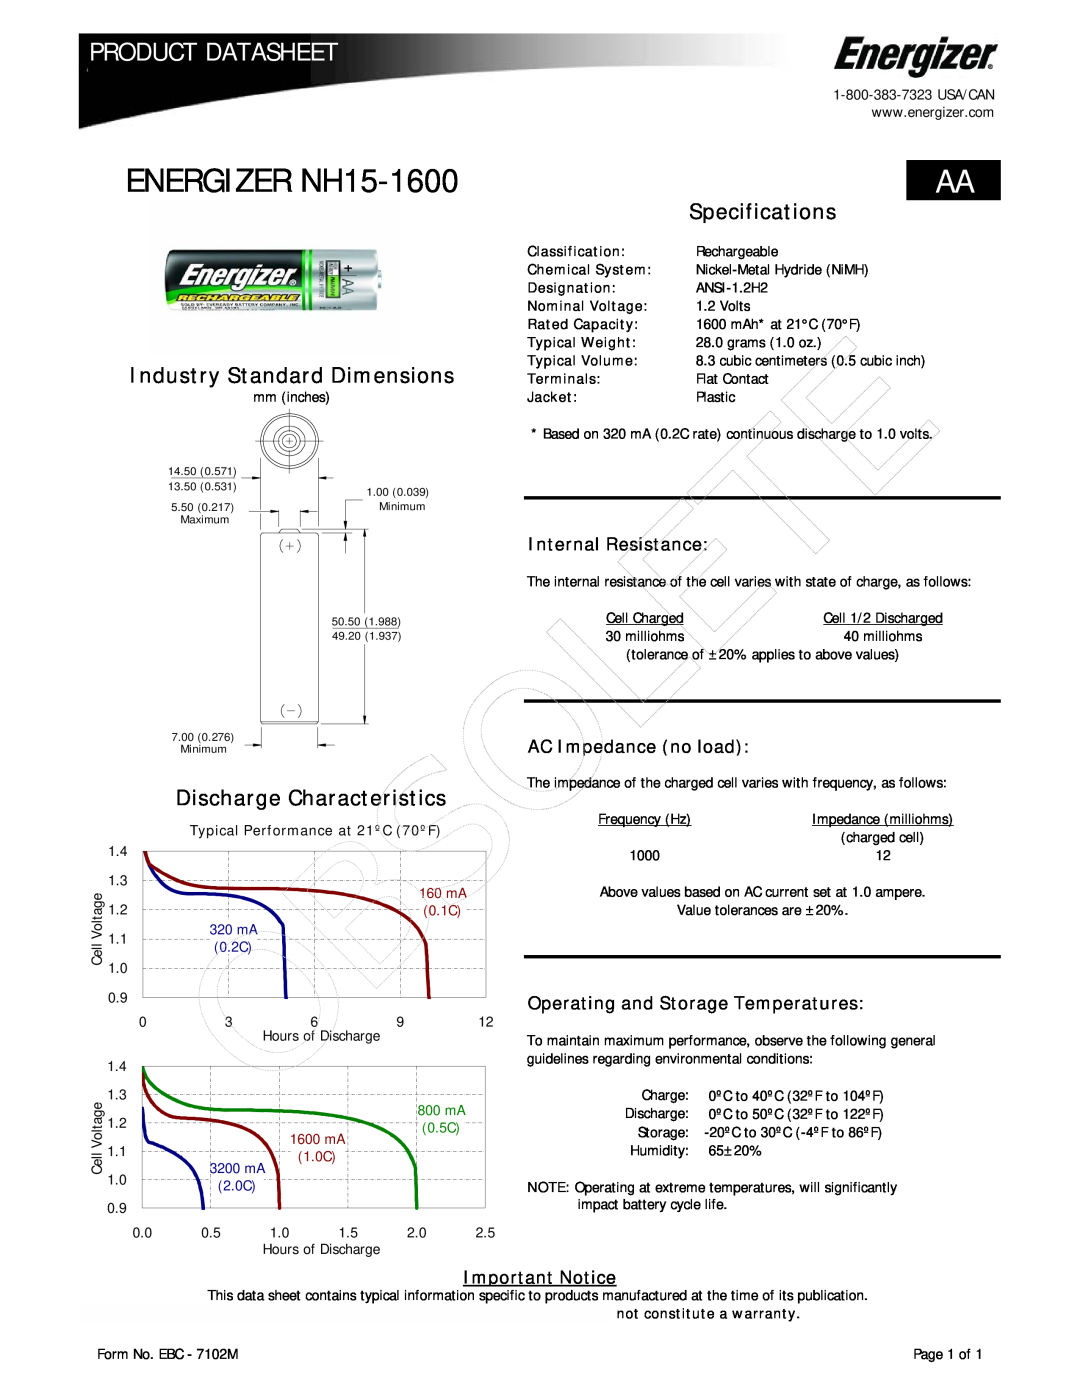 Energizer dimensions ENERGIZER NH15-1600, Product Datasheet, Specifications, Industry Standard Dimensions 